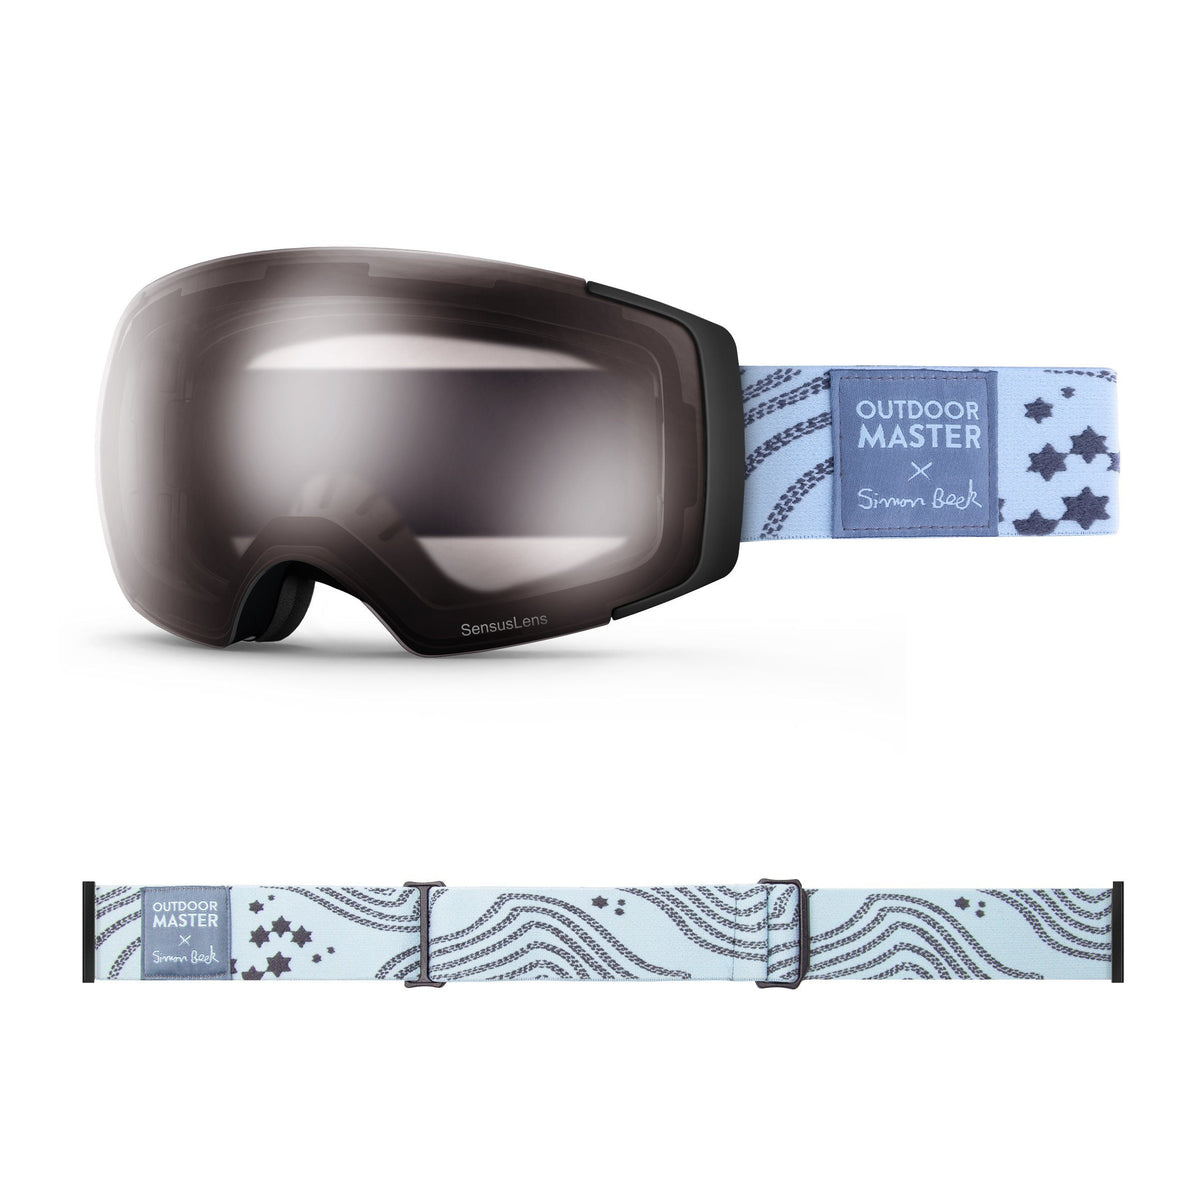 OutdoorMaster x Simon Beck Ski Goggles Pro Series - Snowshoeing Art Limited Edition OutdoorMaster SensusLens VLT40-80% Photochromatic Clear to Pink Star Road-Lightsteelblue